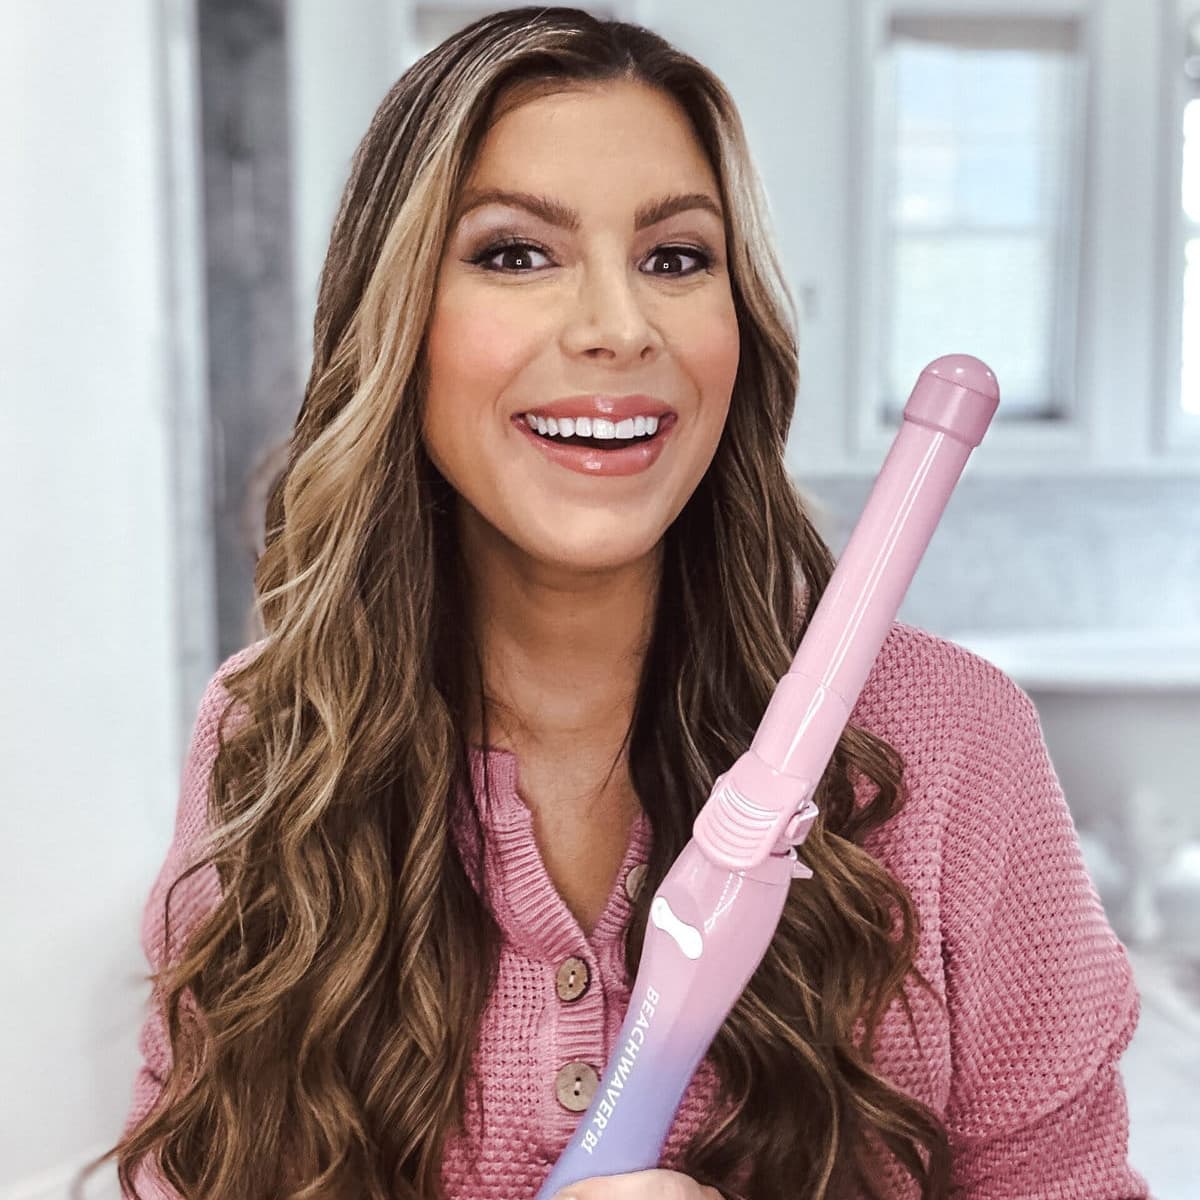 50% OFF Beachwaver discount code to protect what you love! - Mint Arrow